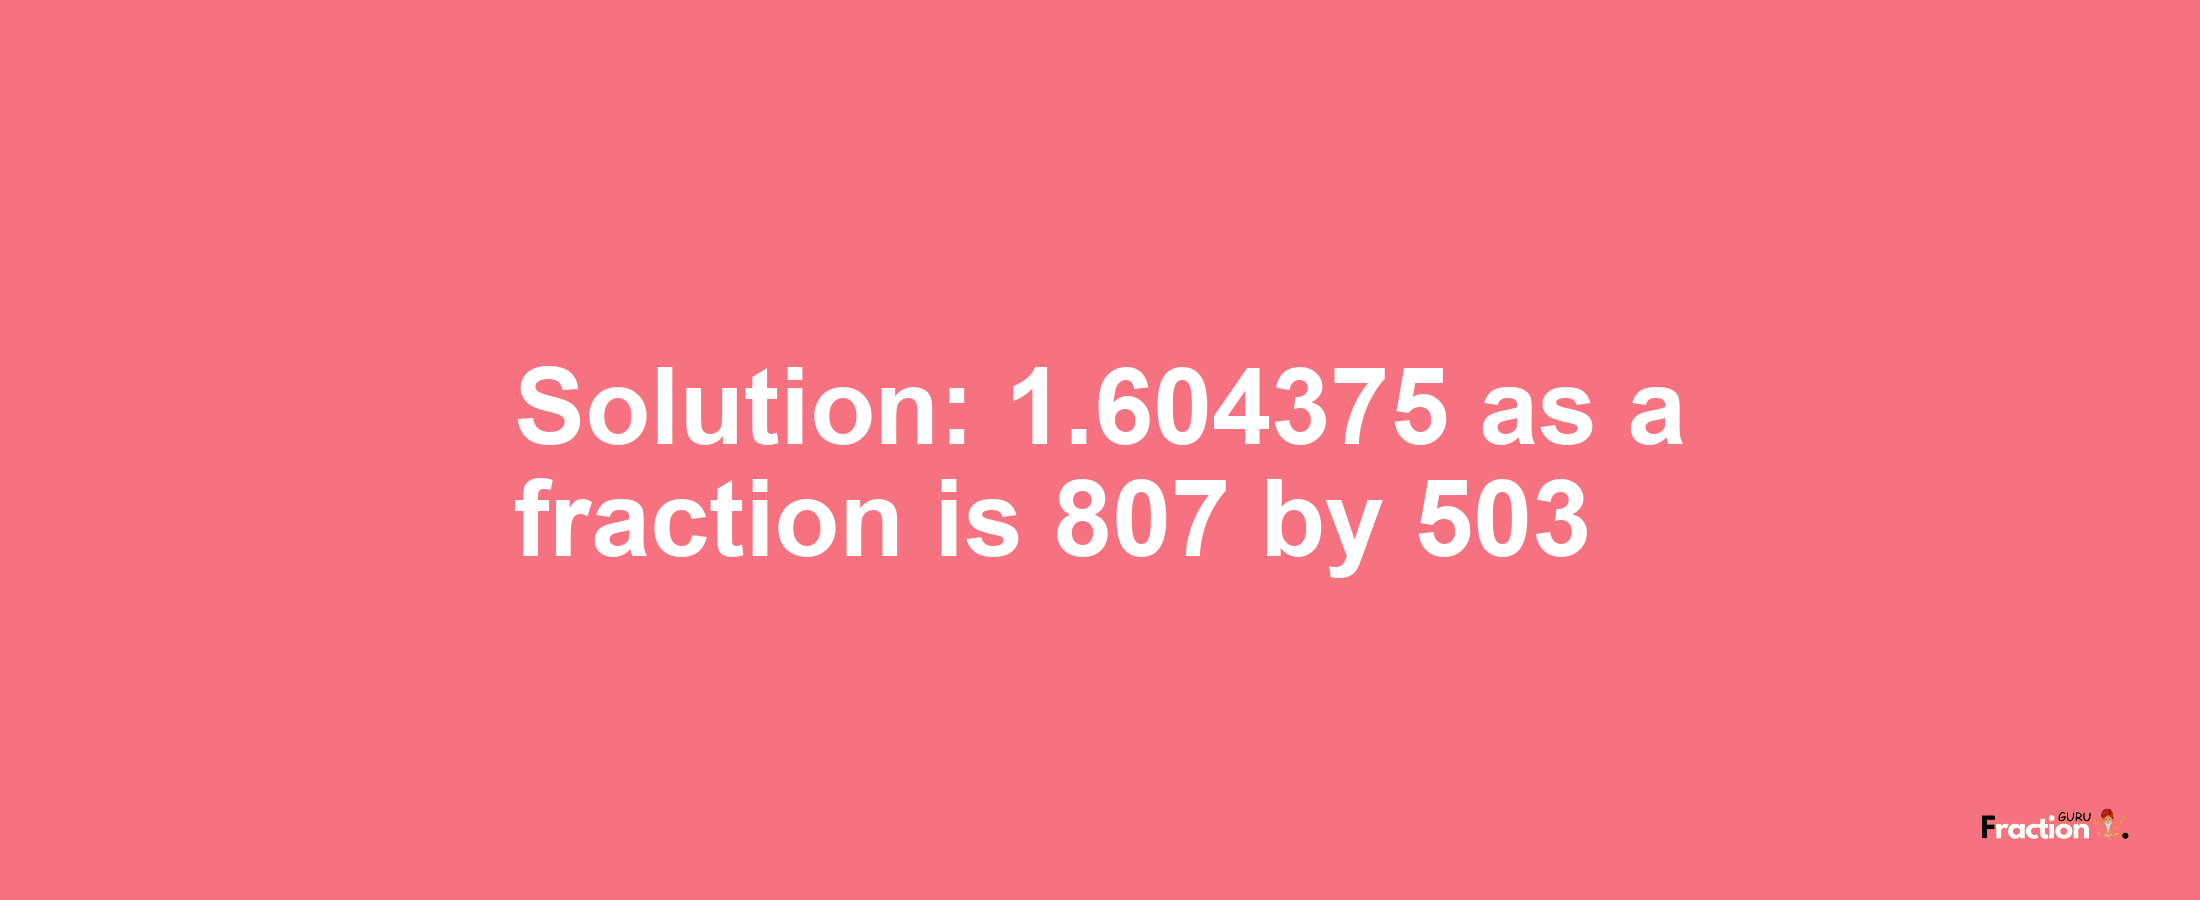 Solution:1.604375 as a fraction is 807/503